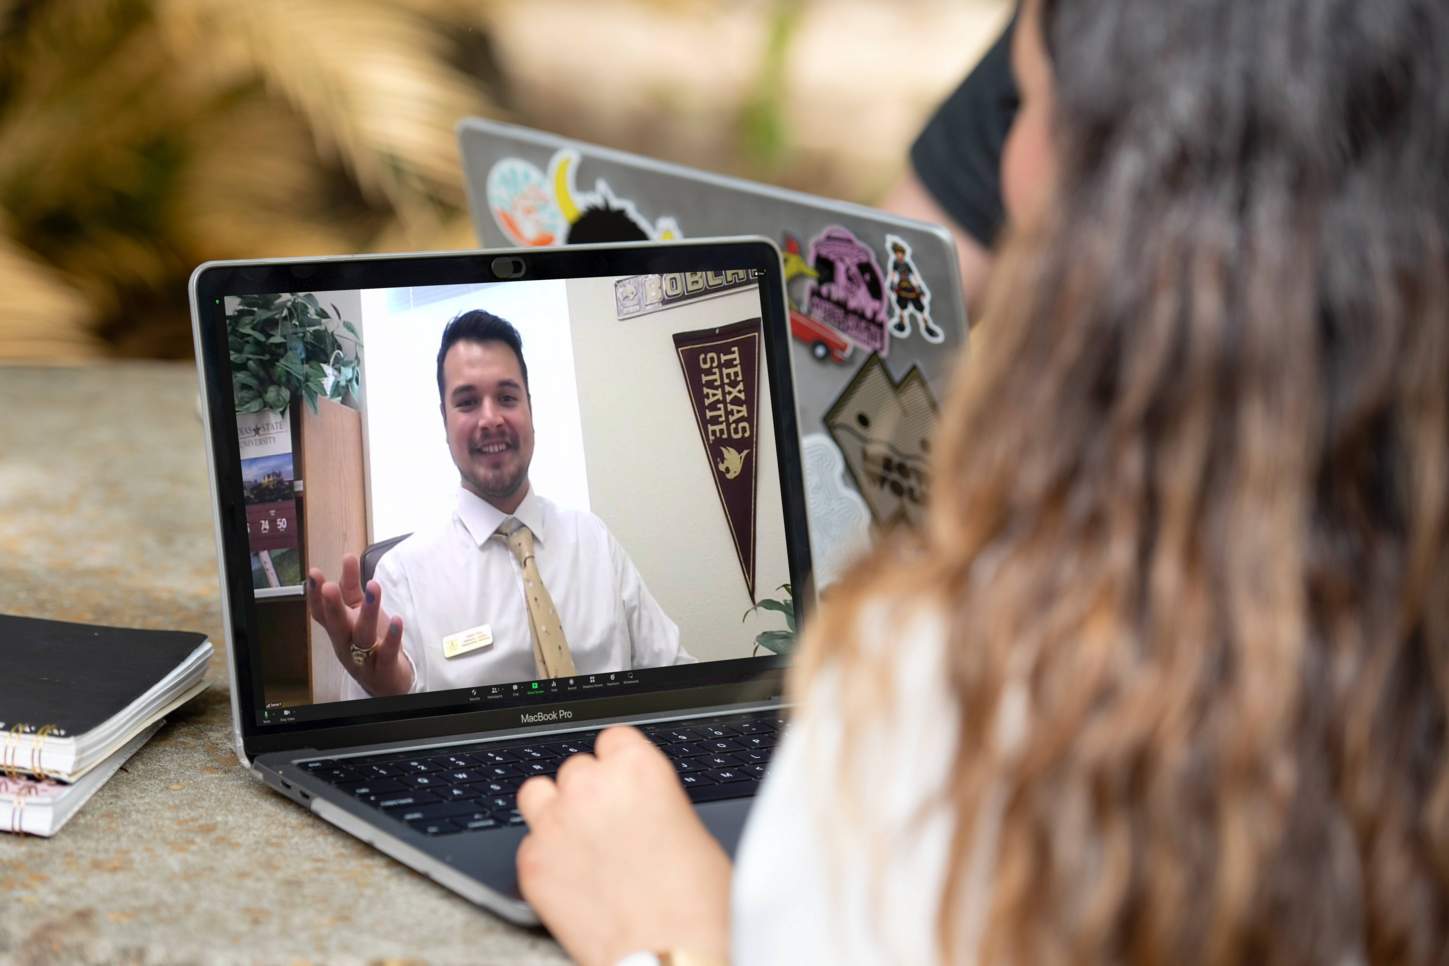 Student meeting with an admissions counselor on video chat.